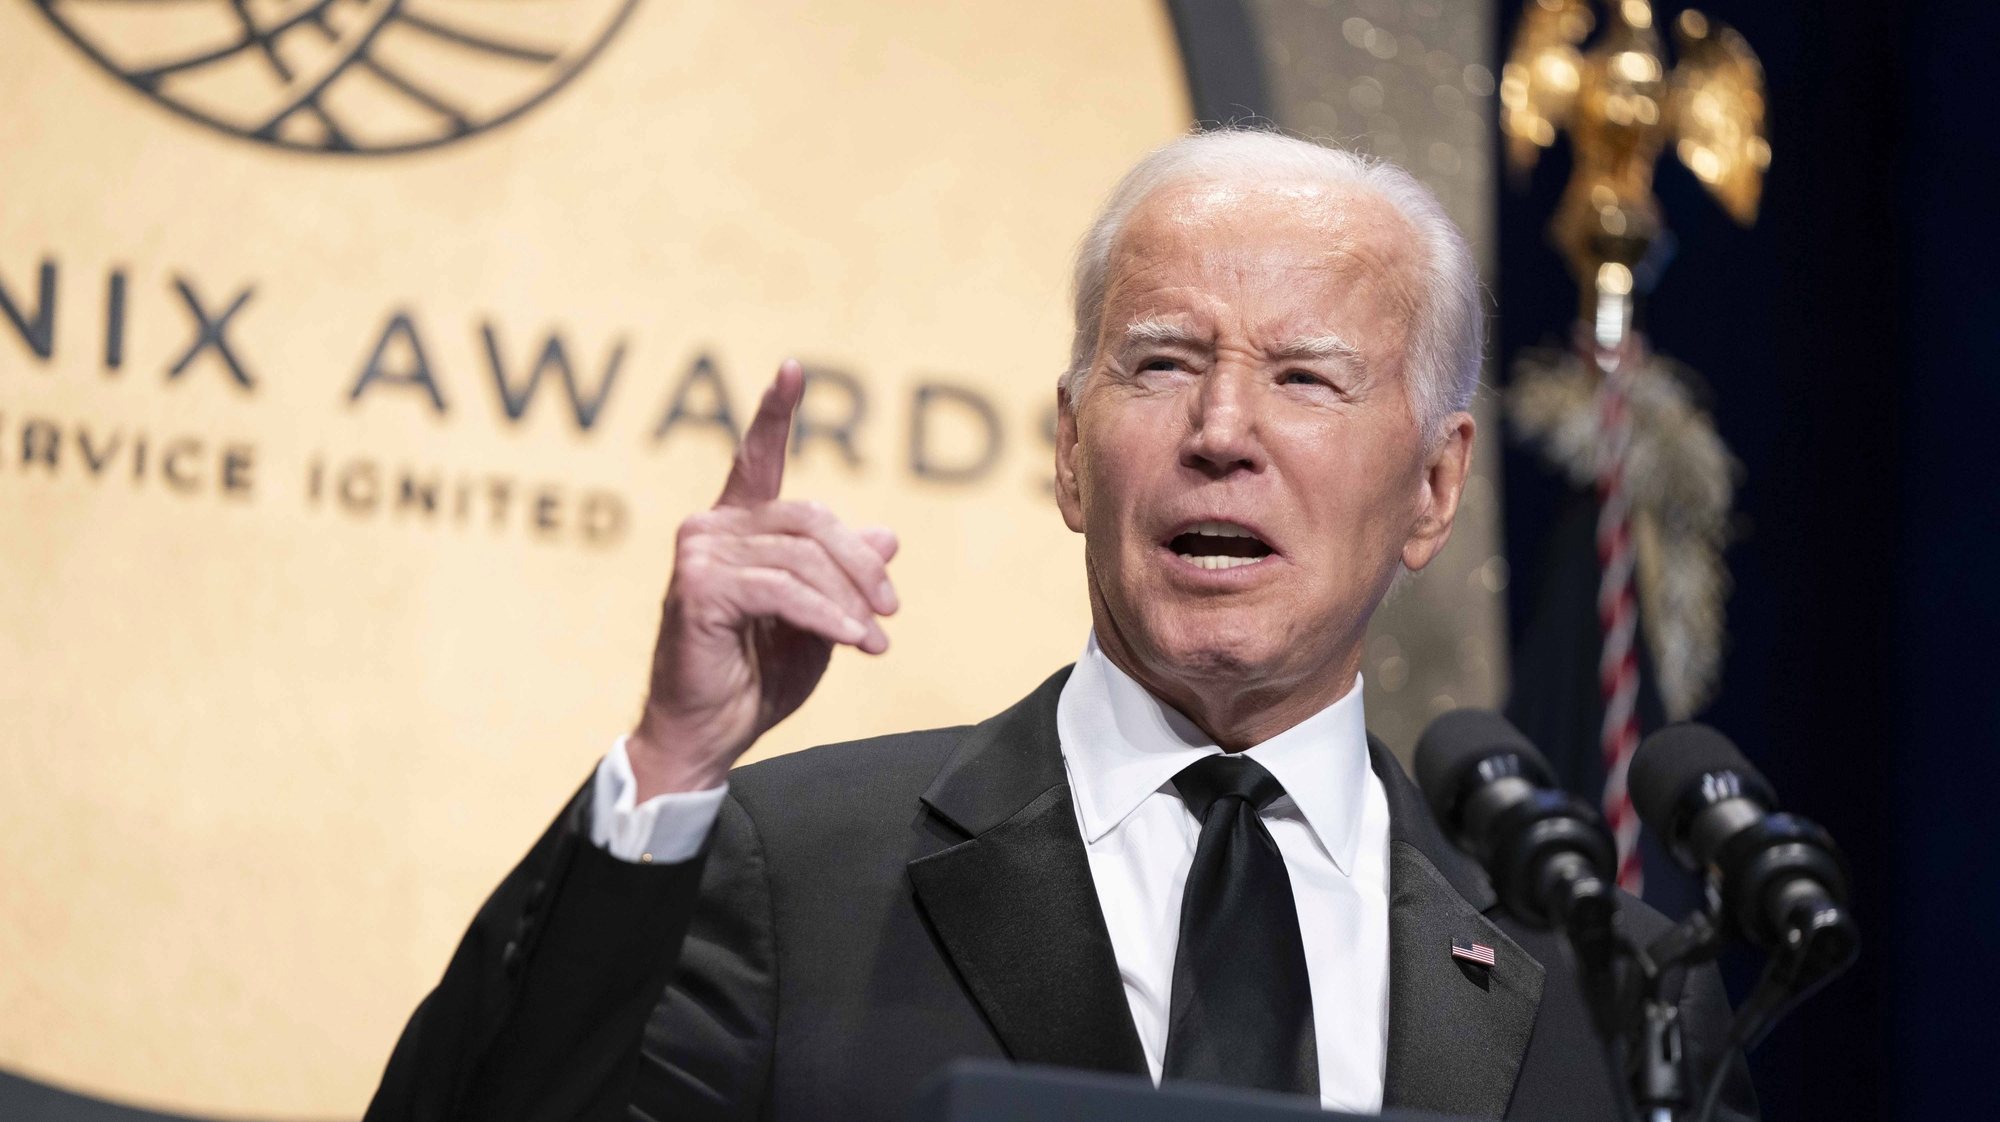 epa10879739 US President Joe Biden speaks during the 2023 Phoenix Awards Dinner at the Washington Convention Center in Washington, DC, USA, 23 September 2023. The dinner, hosted by the Congressional Black Caucus, recognizes individuals who have impacted the Black community.  EPA/BONNIE CASH / POOL